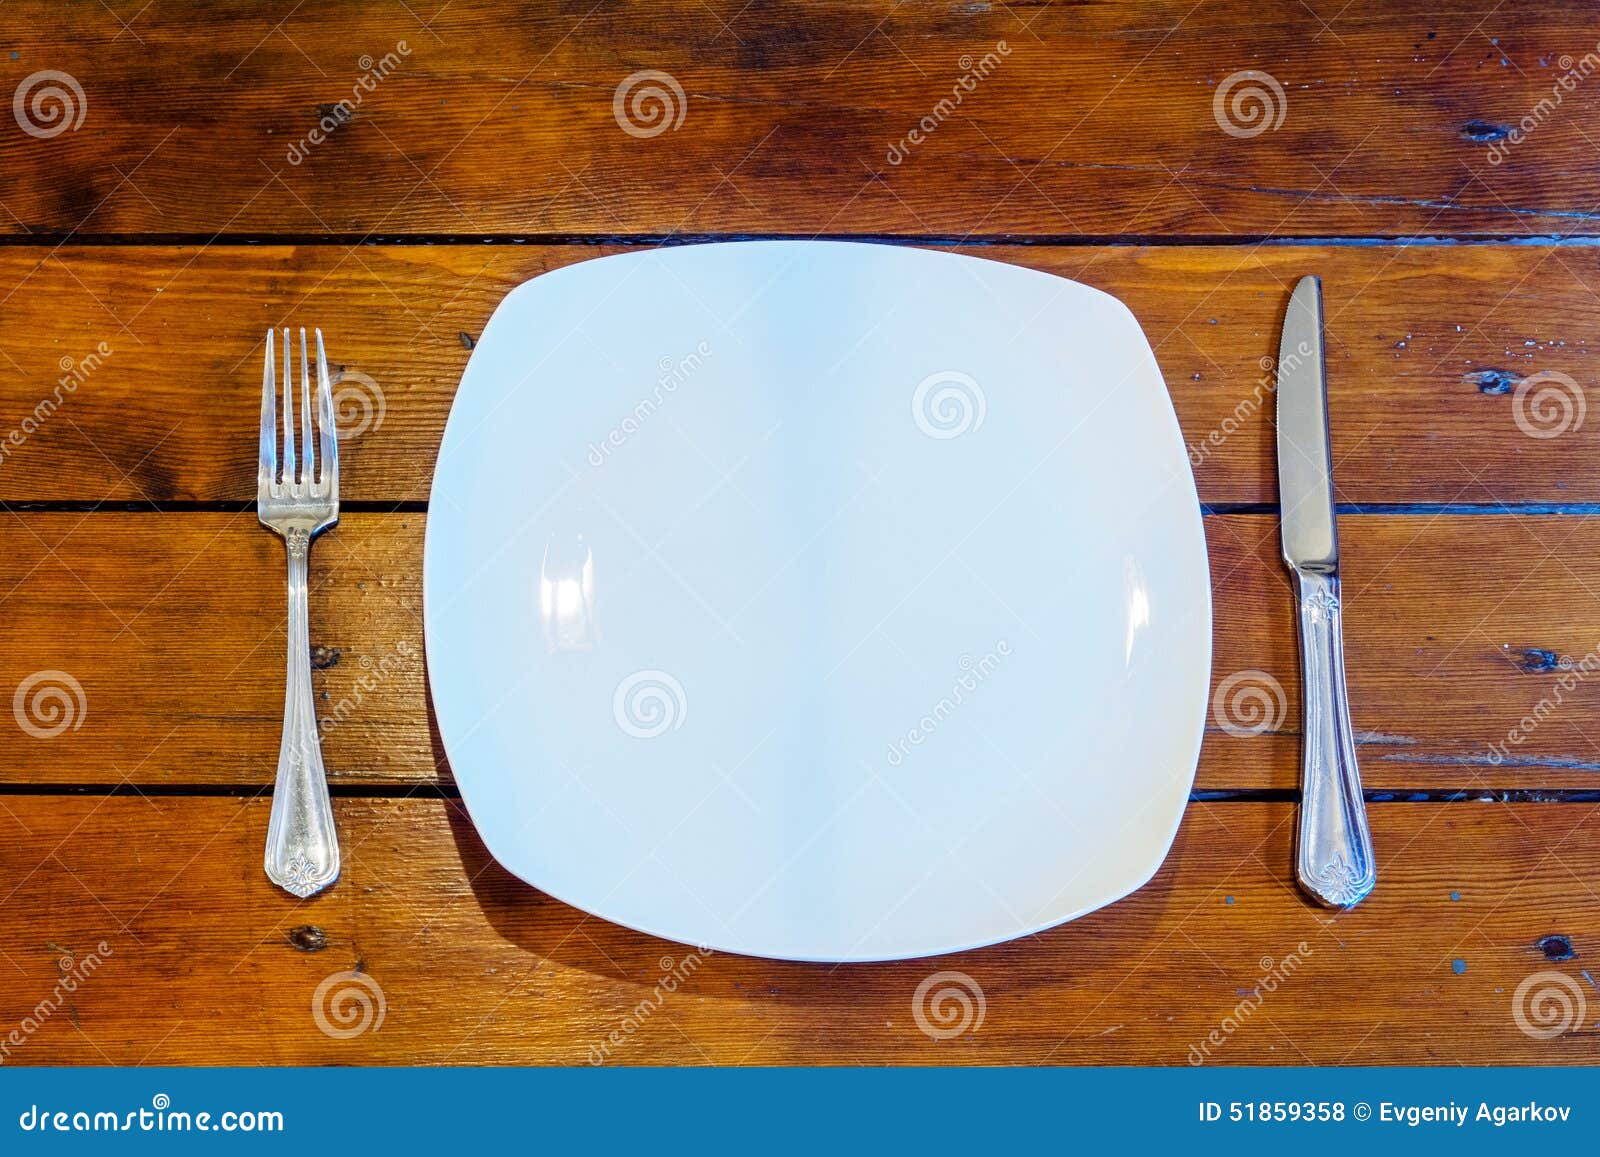 Plates And Cutlery On Wooden Table Stock Photo - Image ...